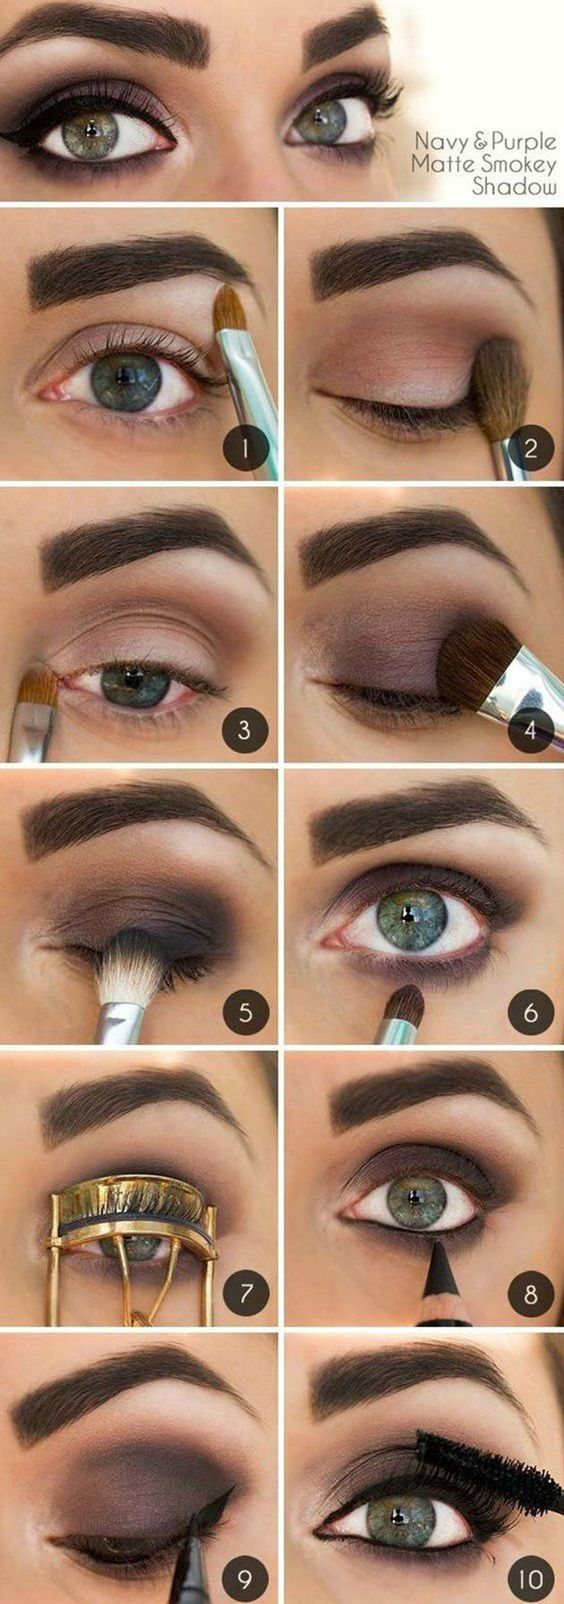 How To Apply Eye Makeup For Green Eyes 10 Step Step Makeup Tutorials For Green Eyes Her Style Code